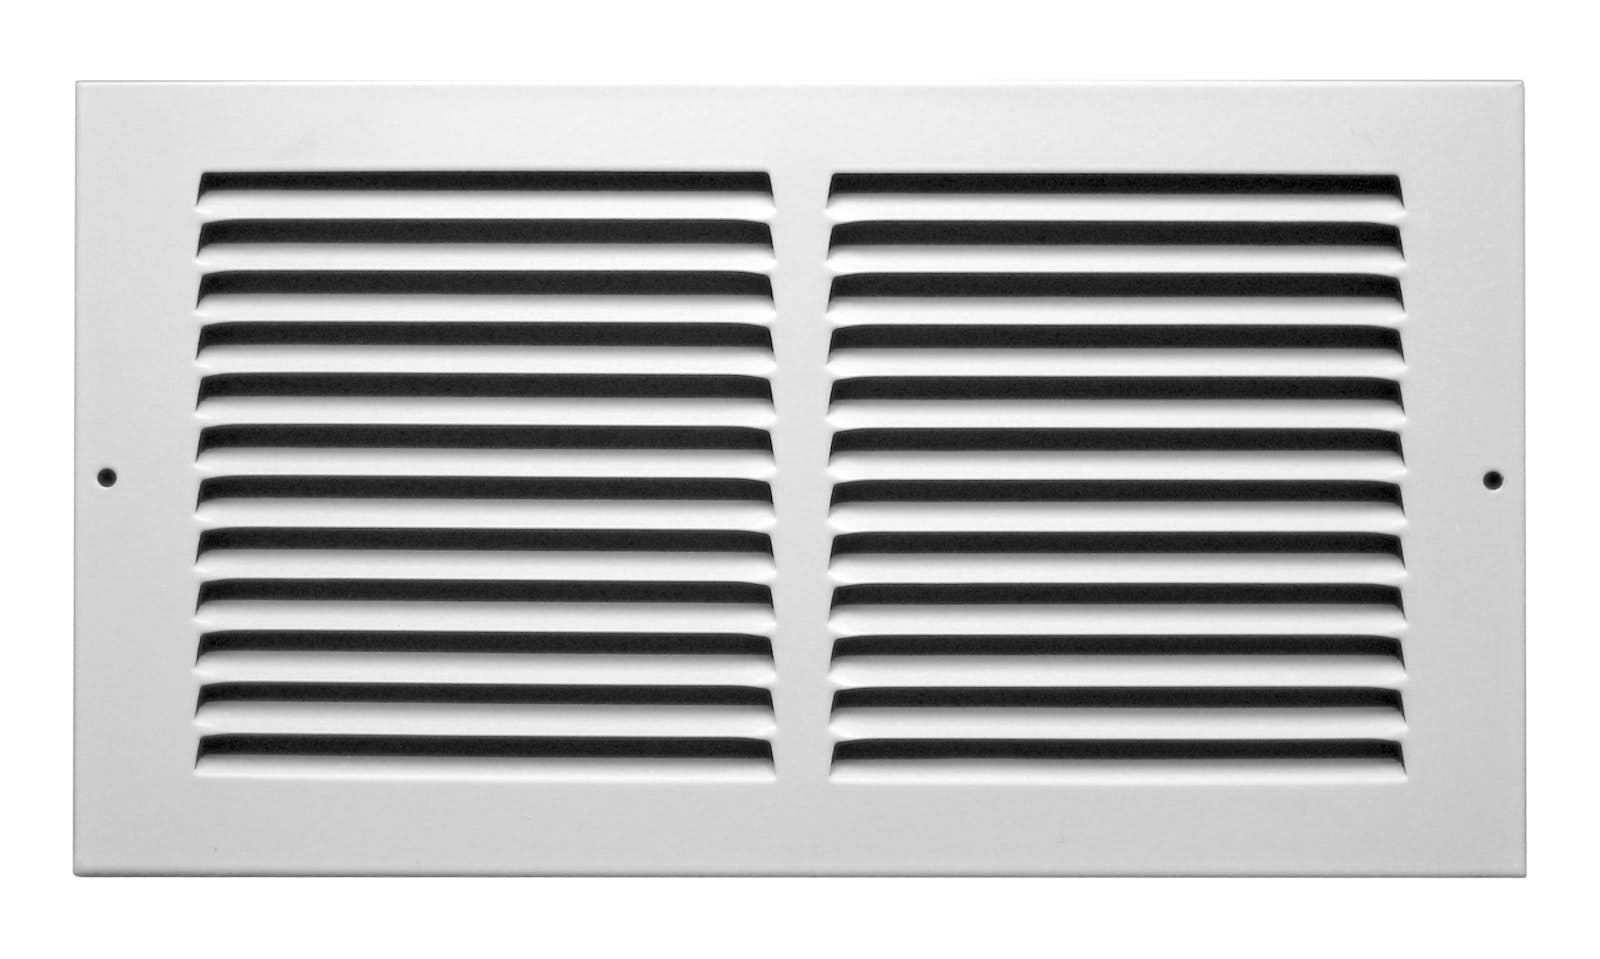 Michigan Air Products - Online StoreSingle Deflection Louvered Return Air  Grille (Model 530)